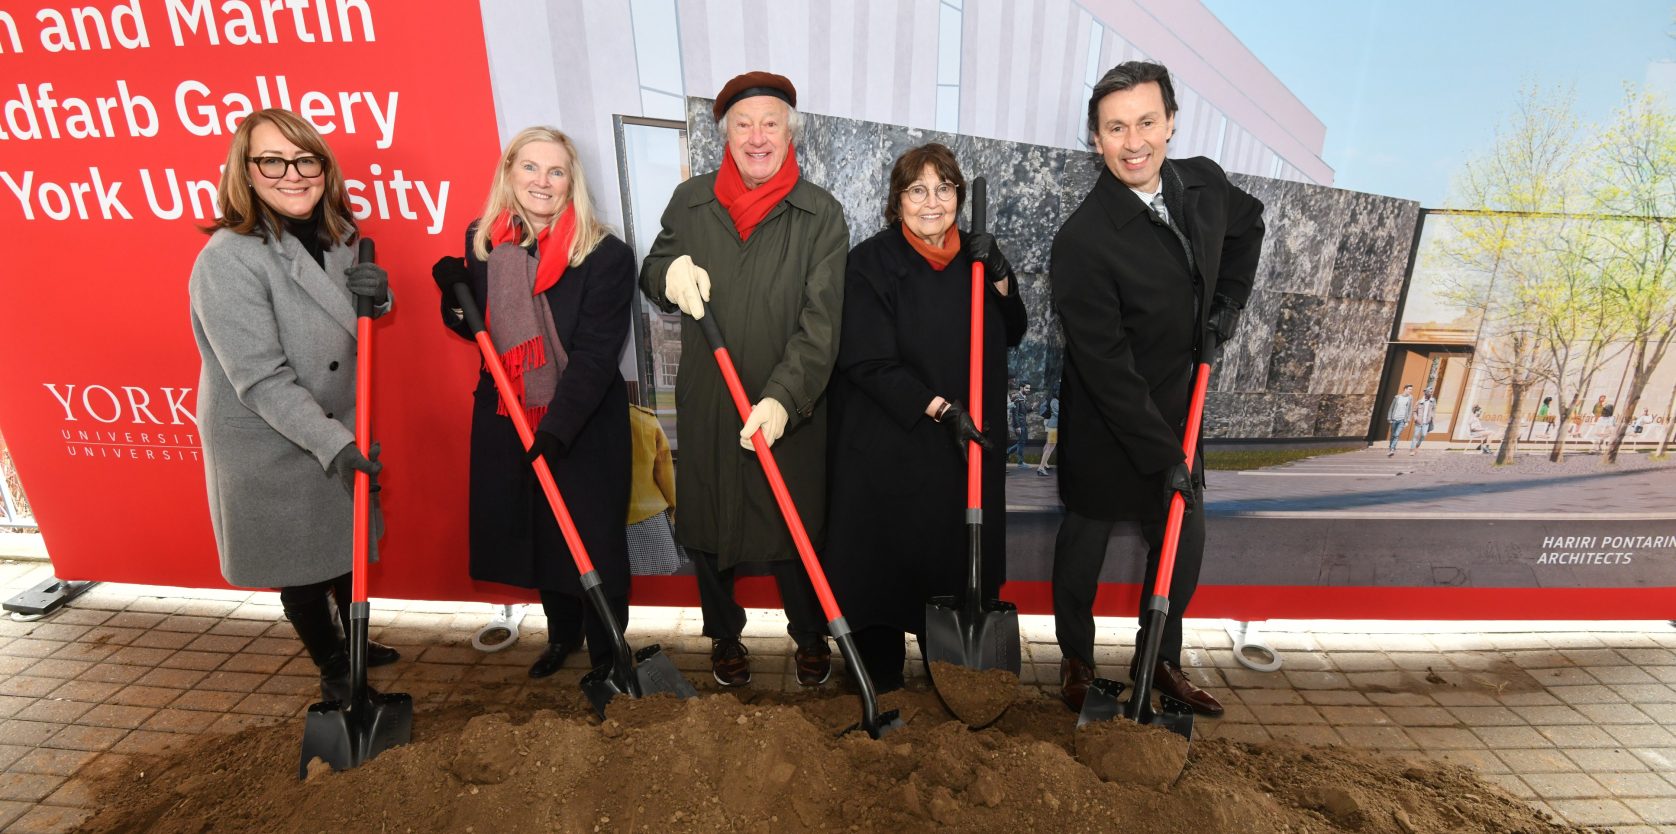 5 people with red shovels break ground in front of a York University banner.